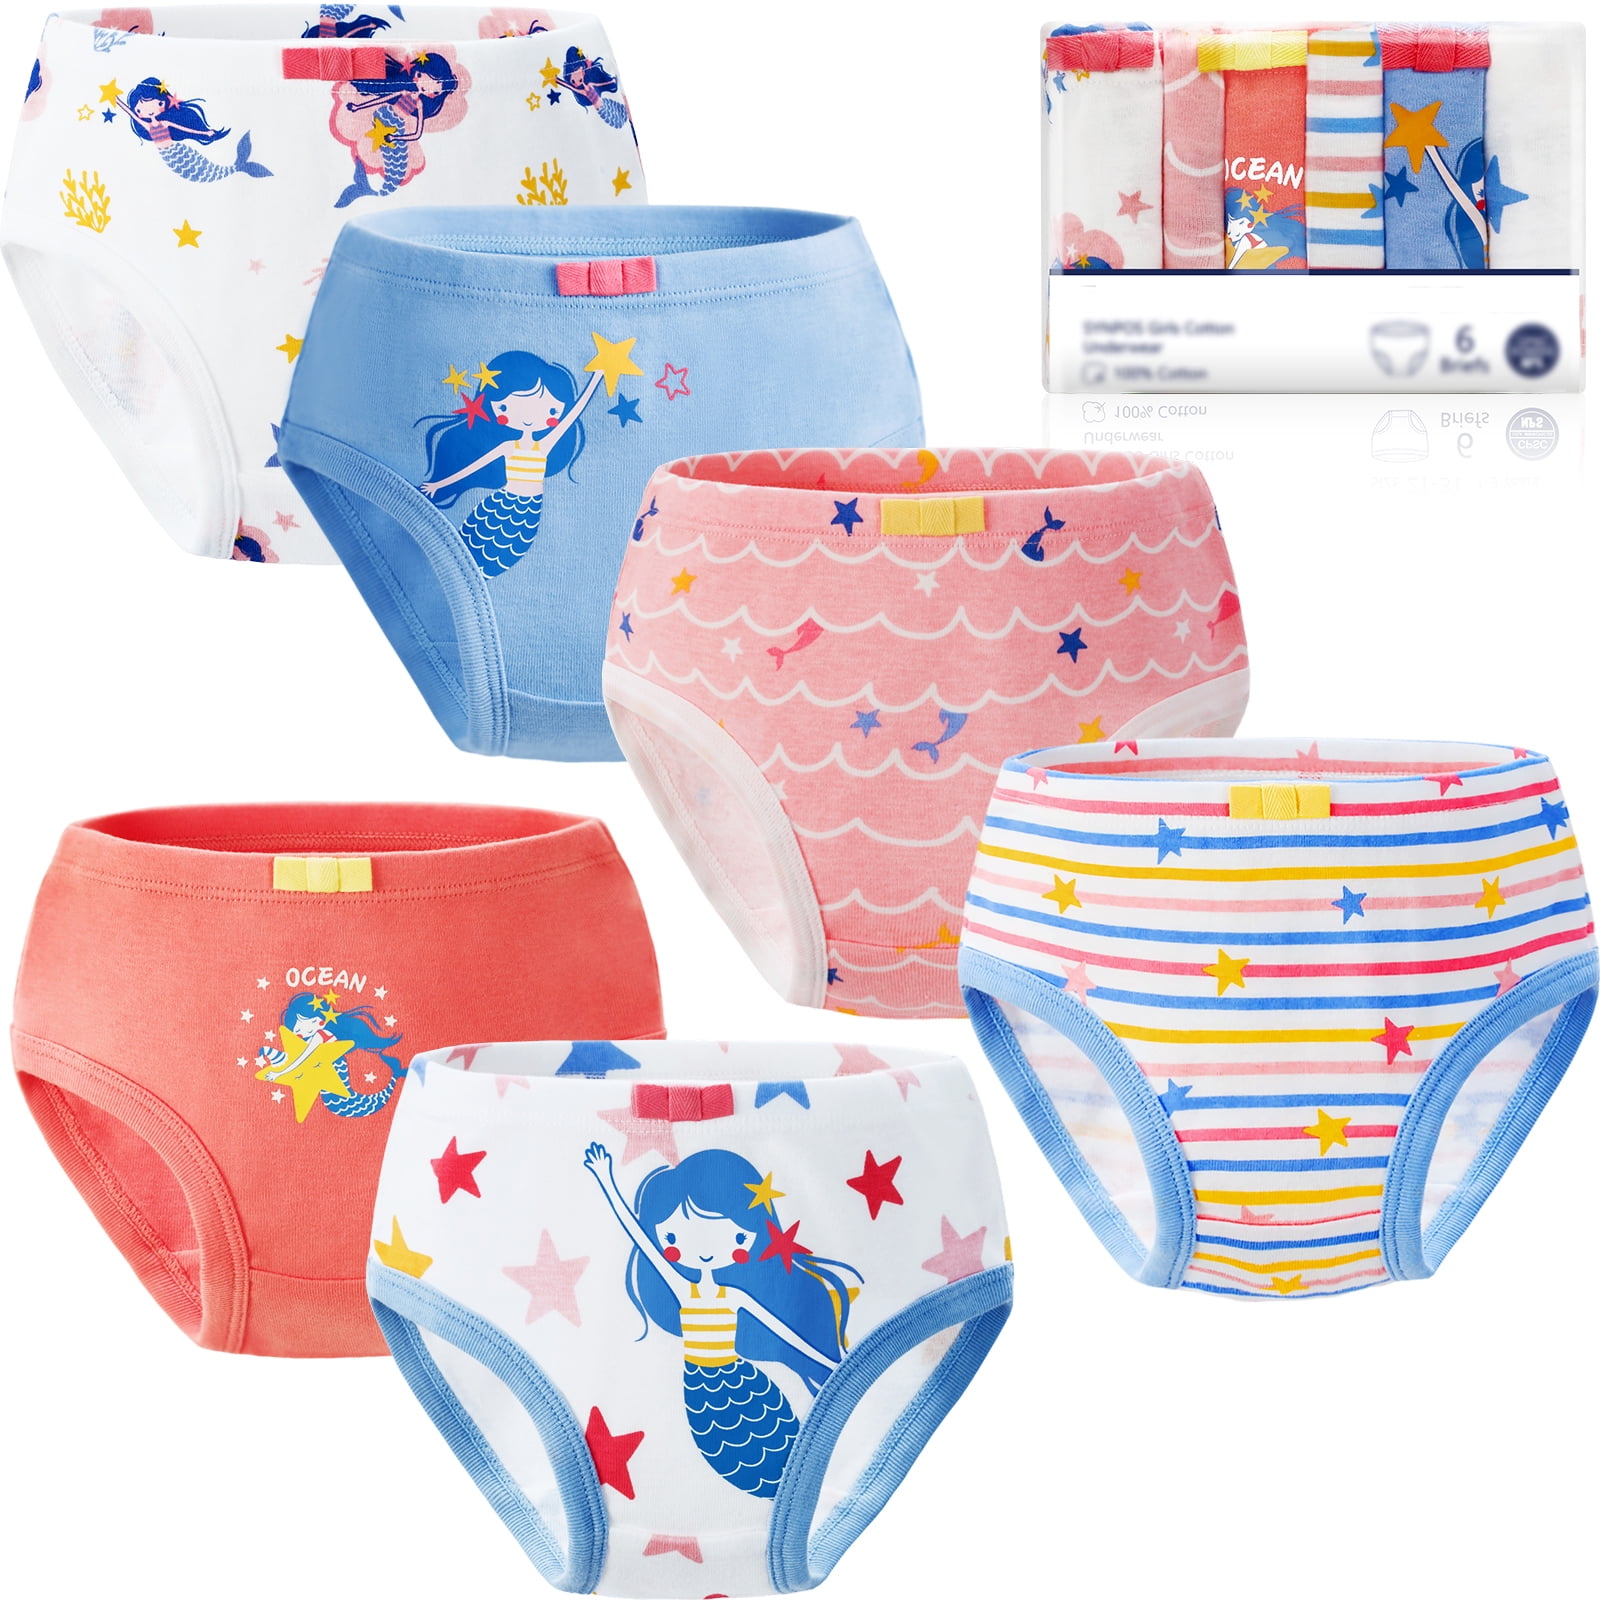 100% Organic Cotton Baby And Toddler Underwear Cotton Girls And Boys  Assorted BriefsPack Of 3,Random Color From Piaojun2017, $7.15